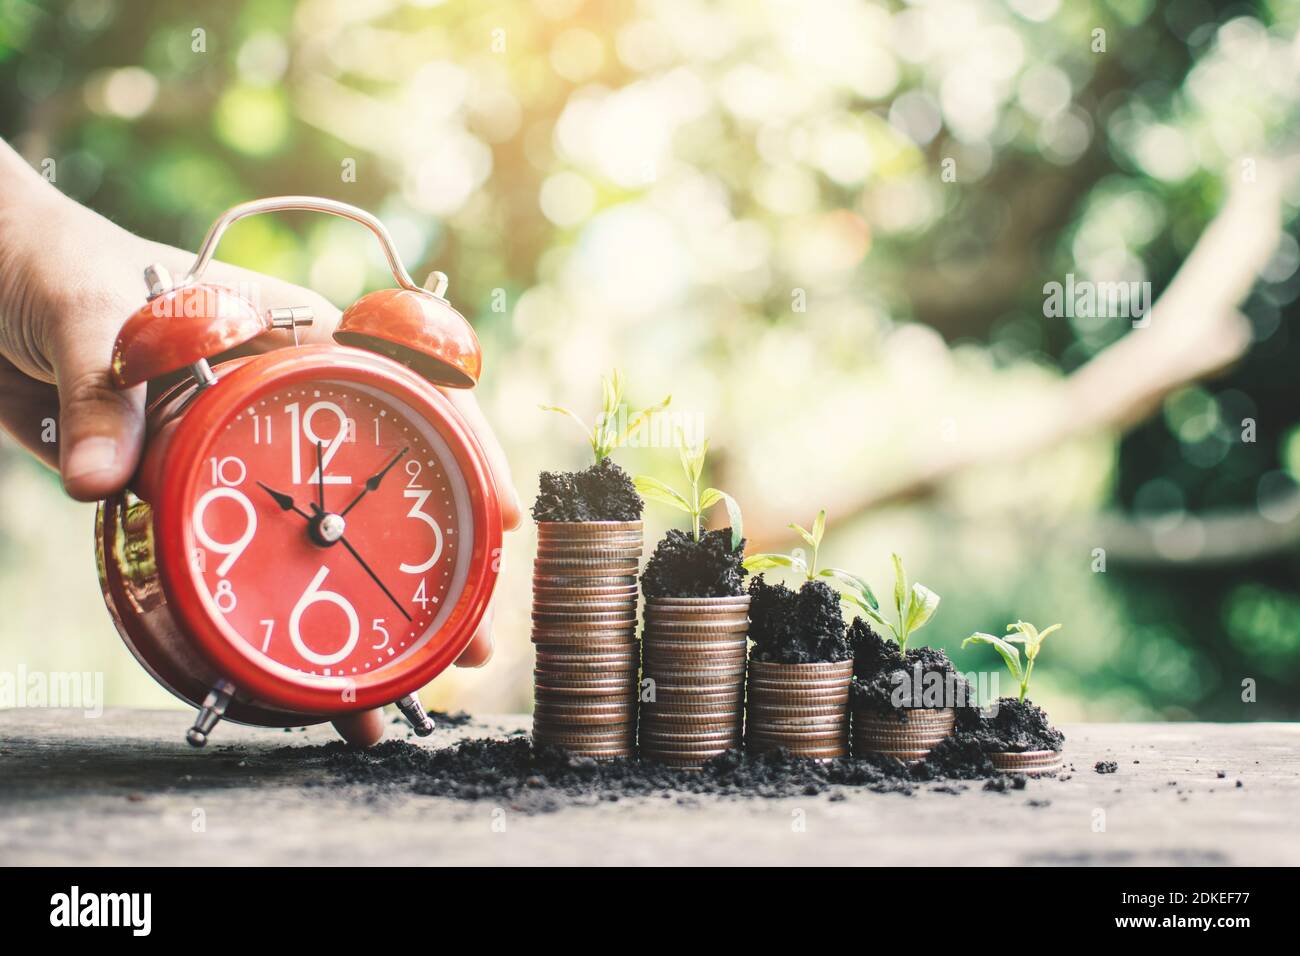 Cropped Image Of Hand Holding Alarm Clock By Stacked Coins And Piggy Bank On Table Stock Photo